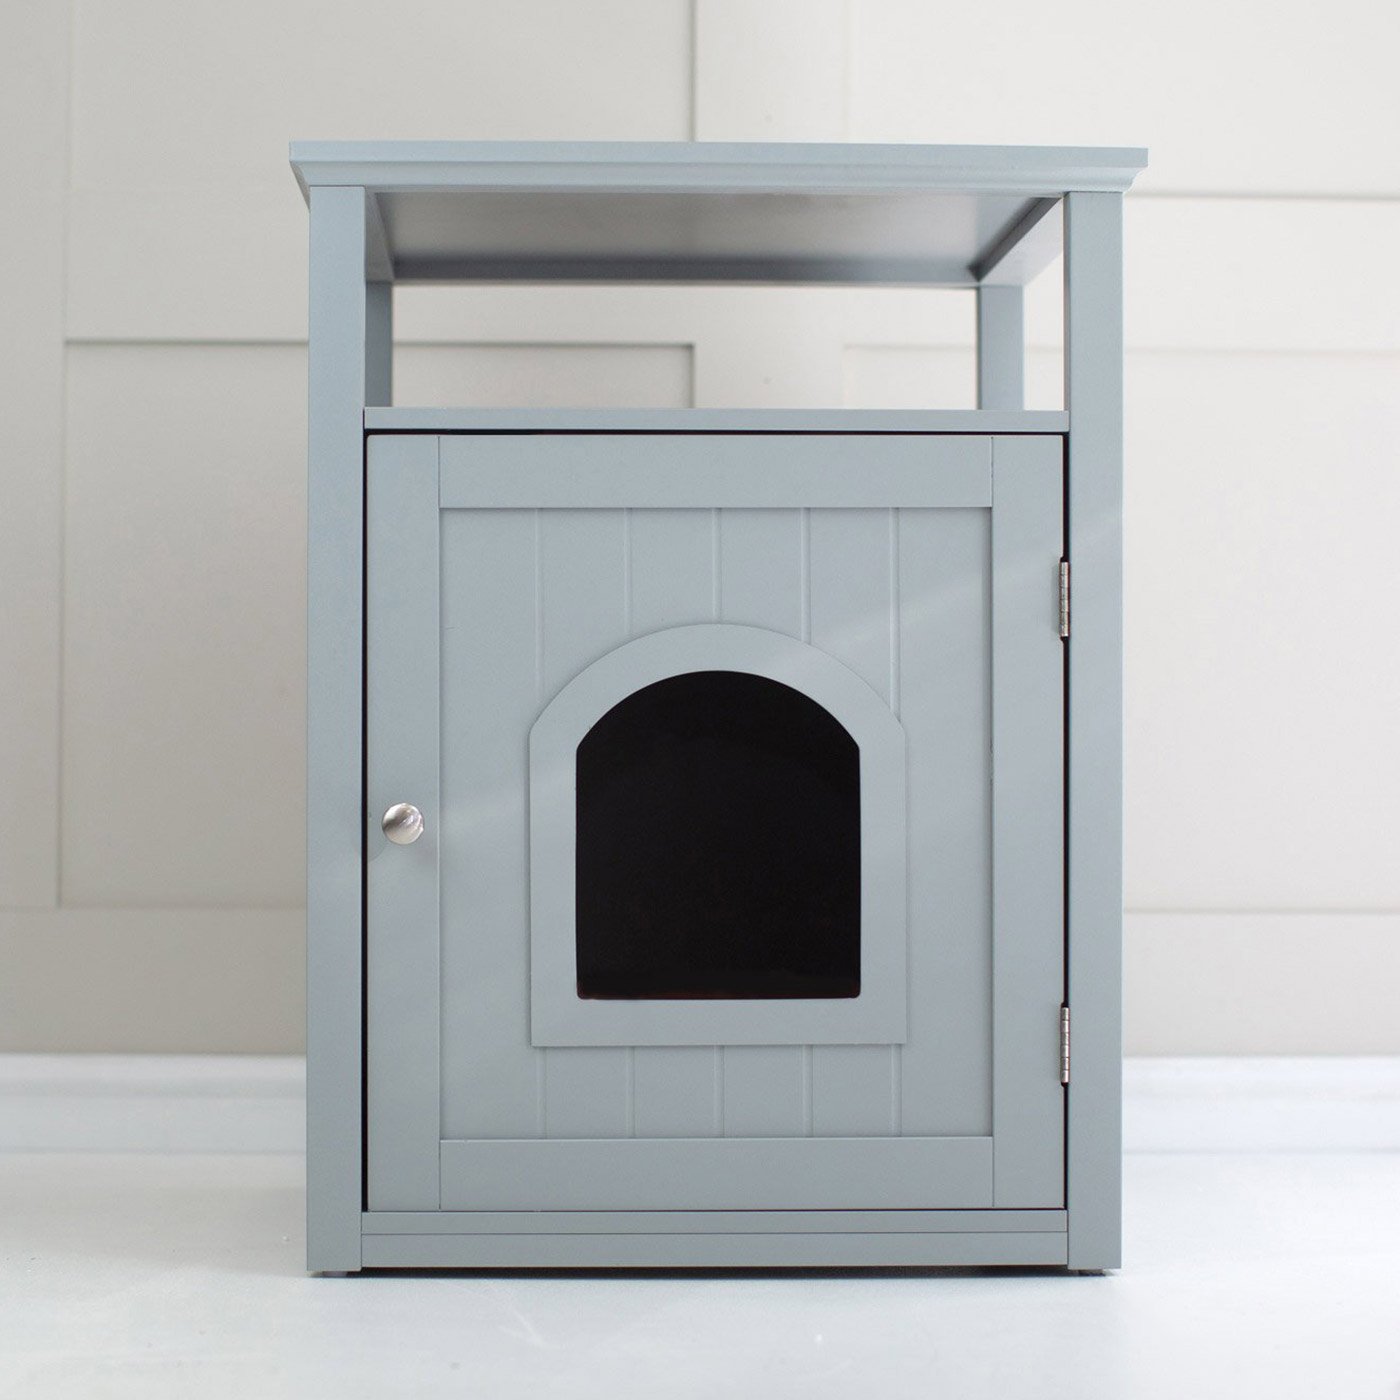 [color:grey] Discover The Perfect Multi-Functional Cat Washroom, Featuring Hinged Door for a Discreet Cat Loo. Suitable for All Cat Breeds! Made From Durable Wood to Ensure a Stylish Finish That Suits Any Home Decor! Includes a Complimentary Litter Tray. Available In Grey & White Now at Lords & Labradors US